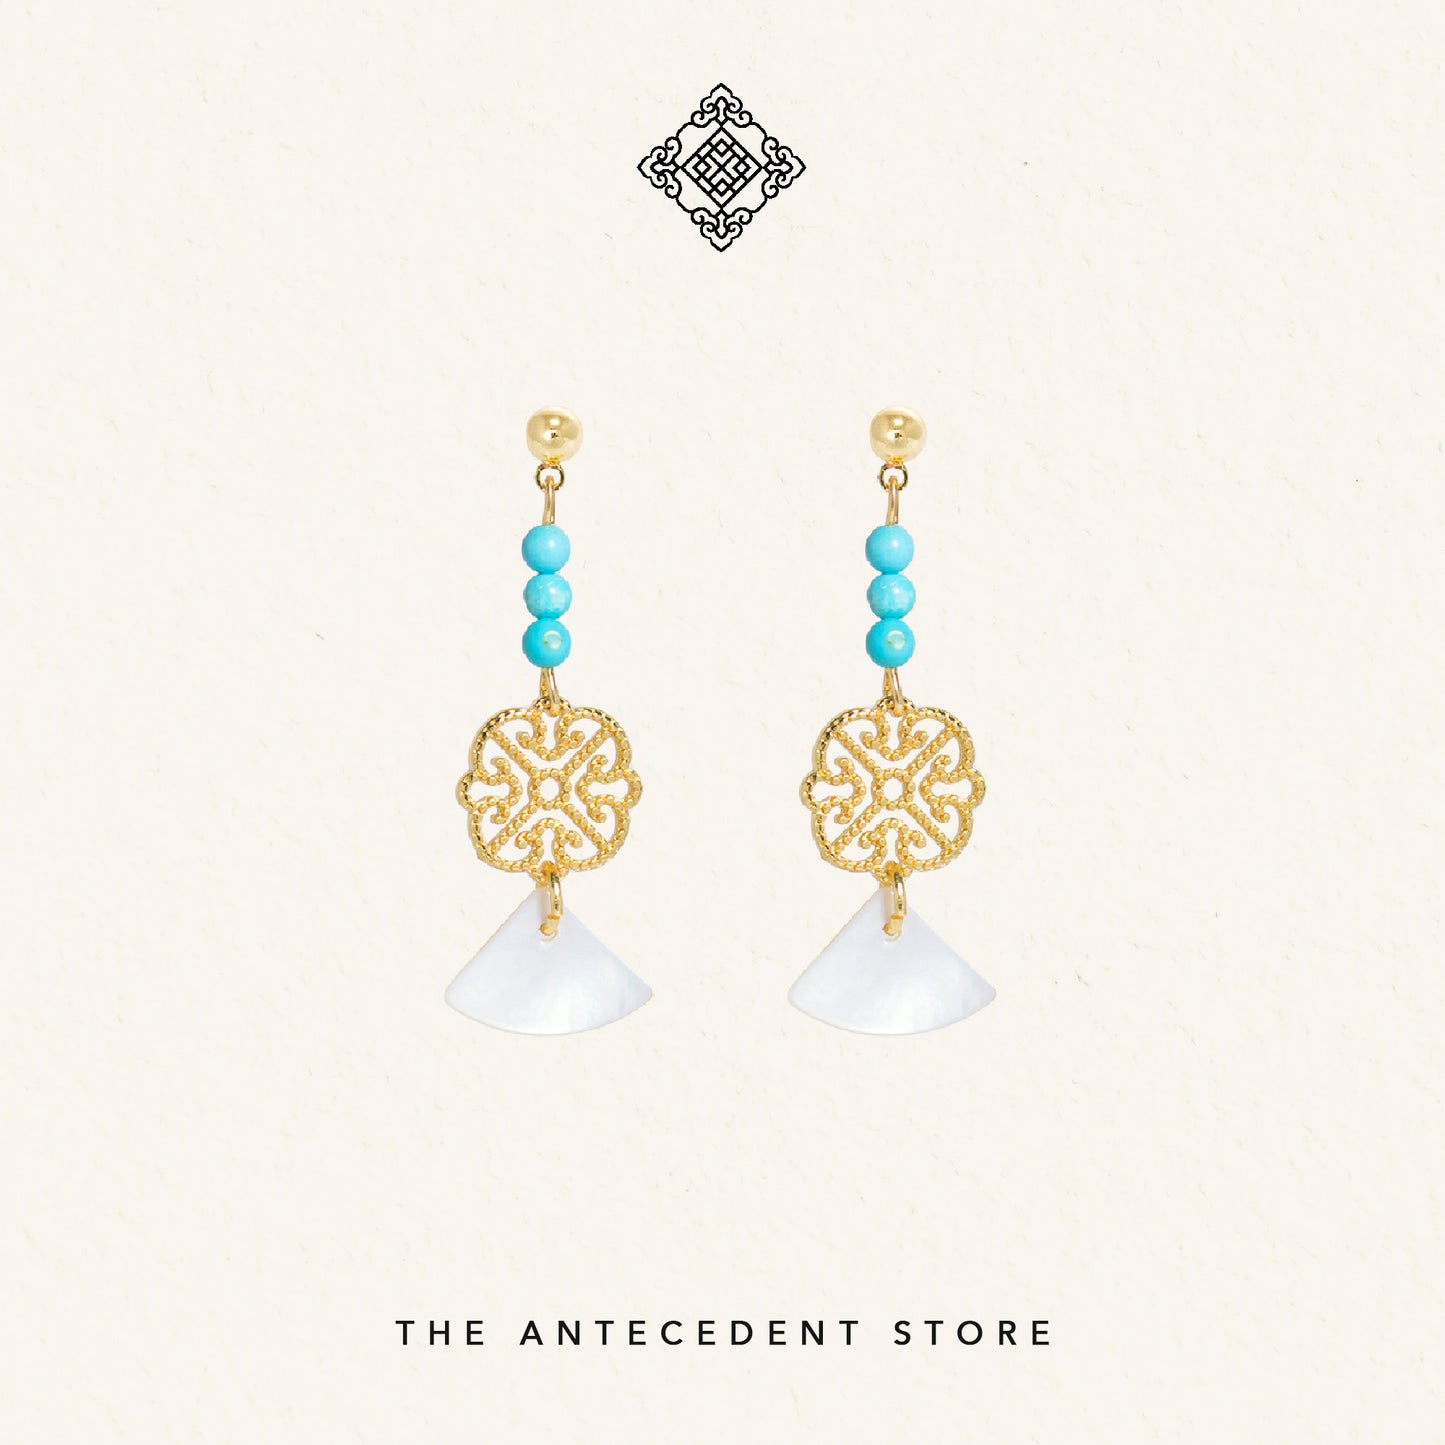 Oriental Motif Earrings With Turquoise Crystals - 14K Real Gold Plated Jewelry